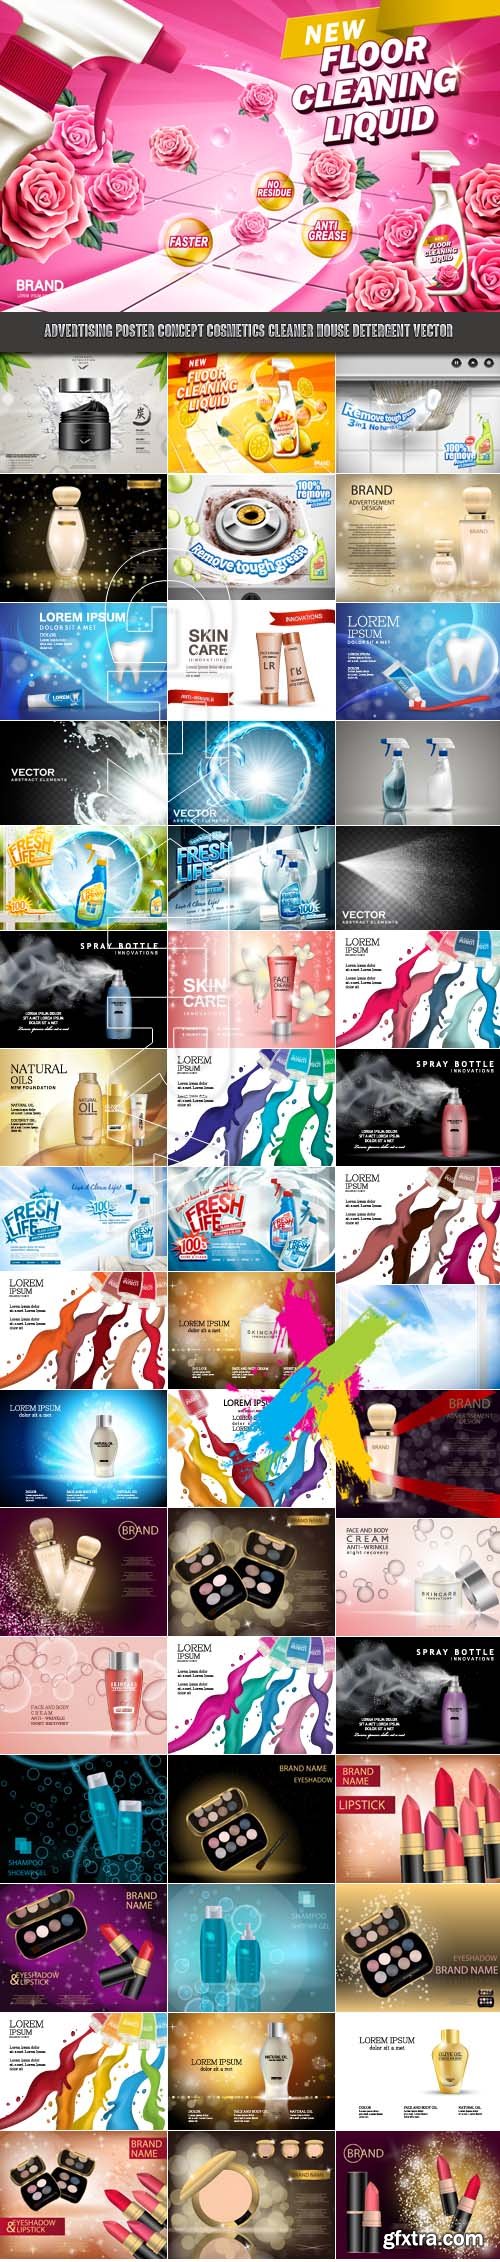 Advertising Poster Concept Cosmetics cleaner house detergent vector